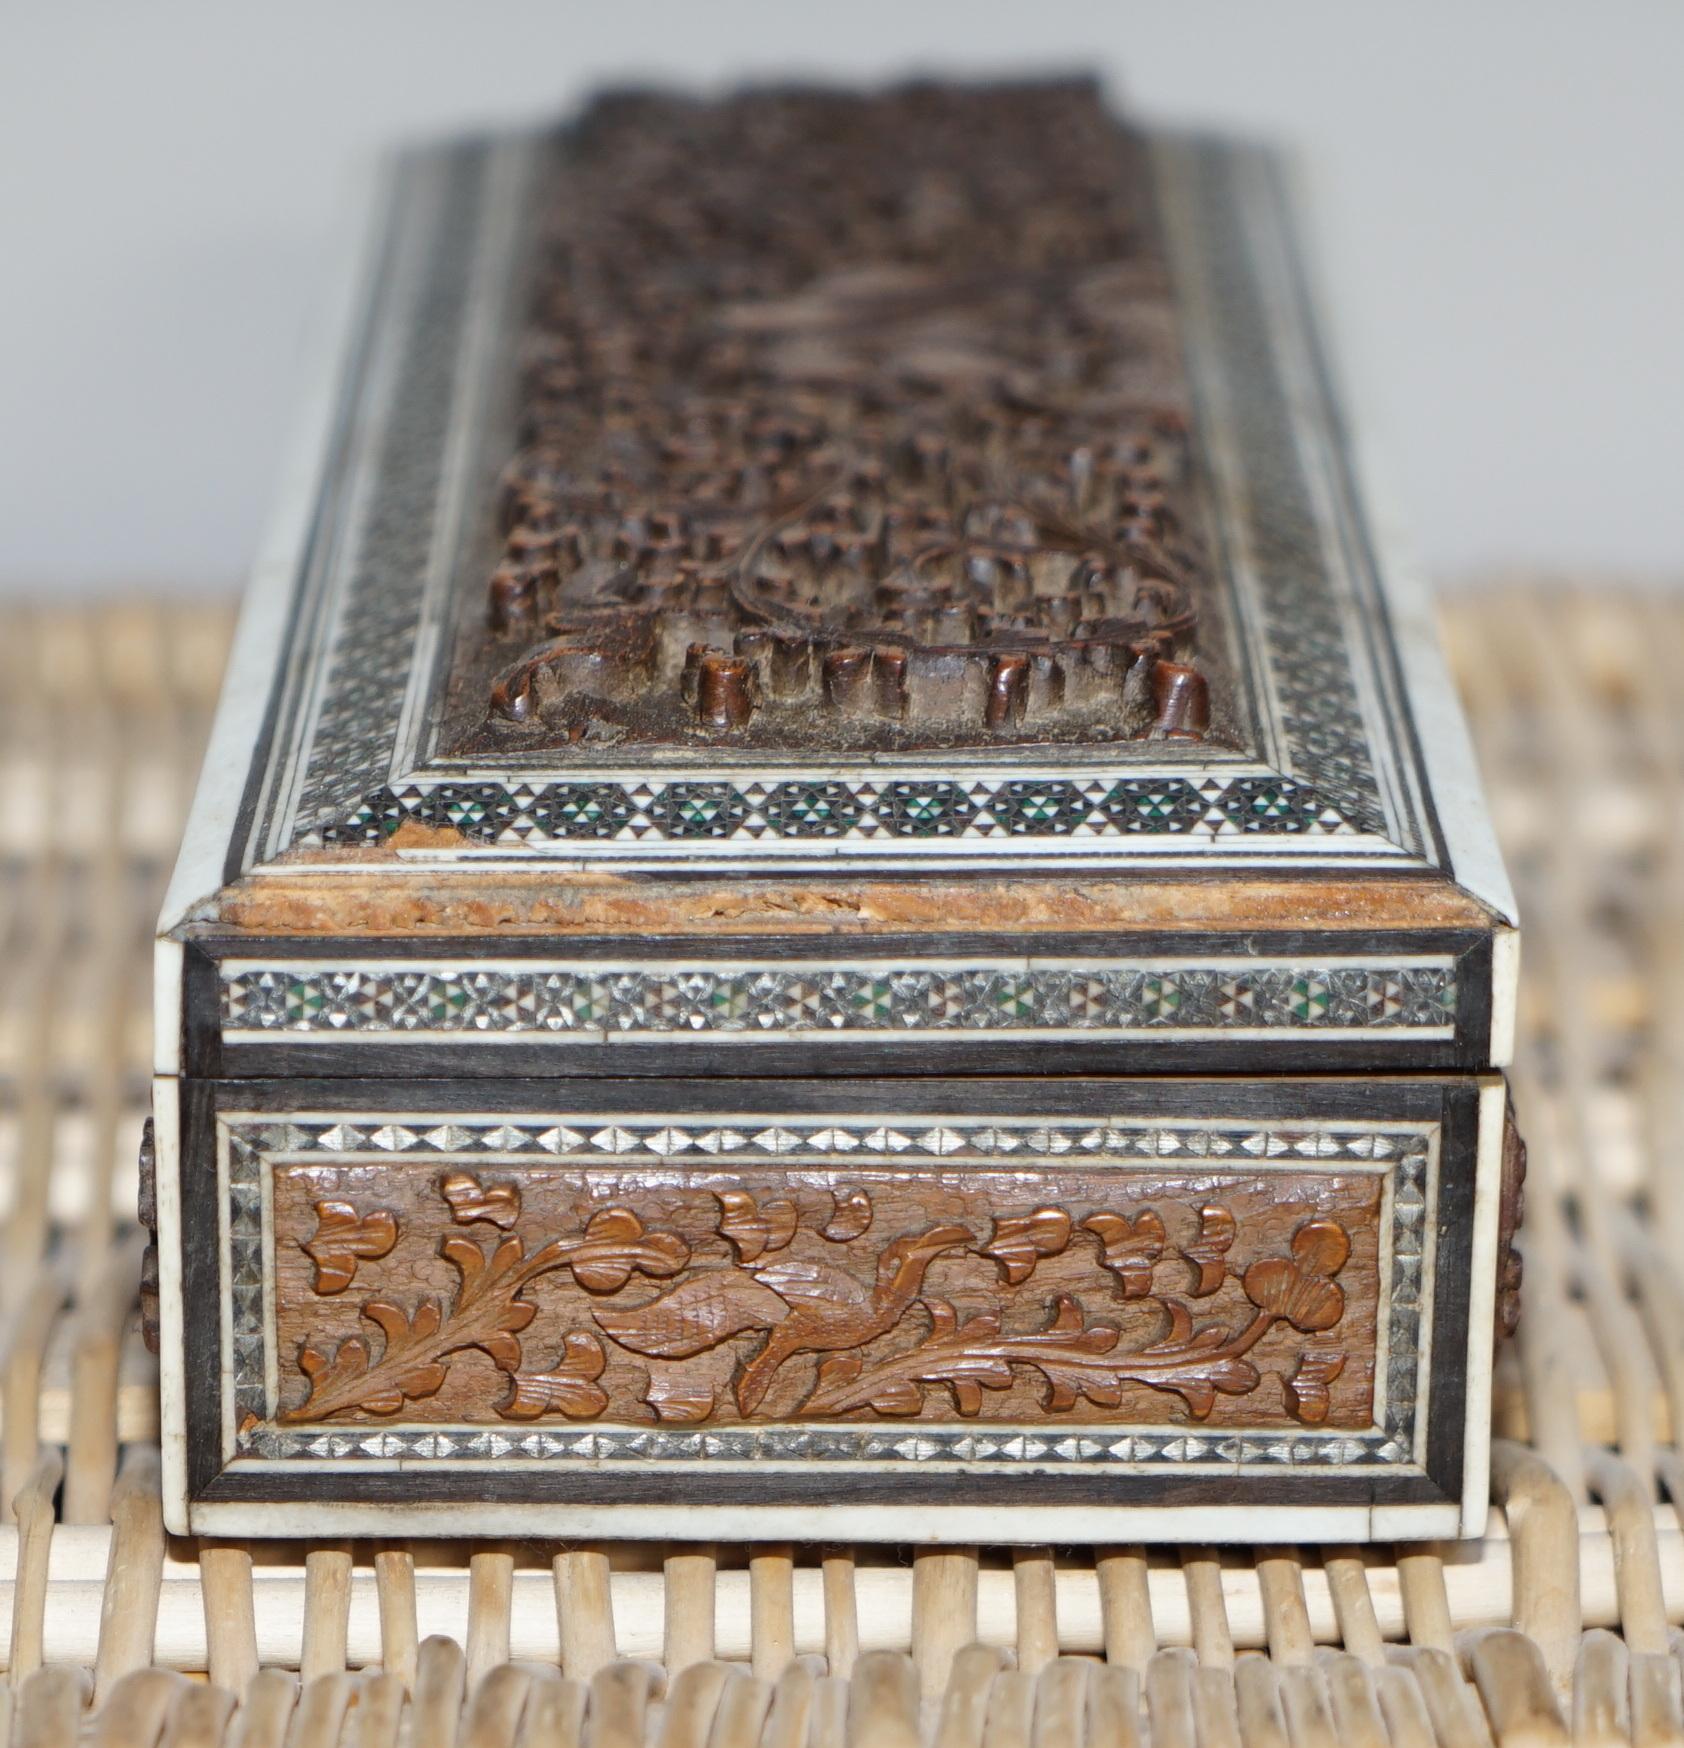 19th Century Anglo Indian Vizagapatam Carved Sandalwood Box Micro Mosaic Inlays For Sale 4